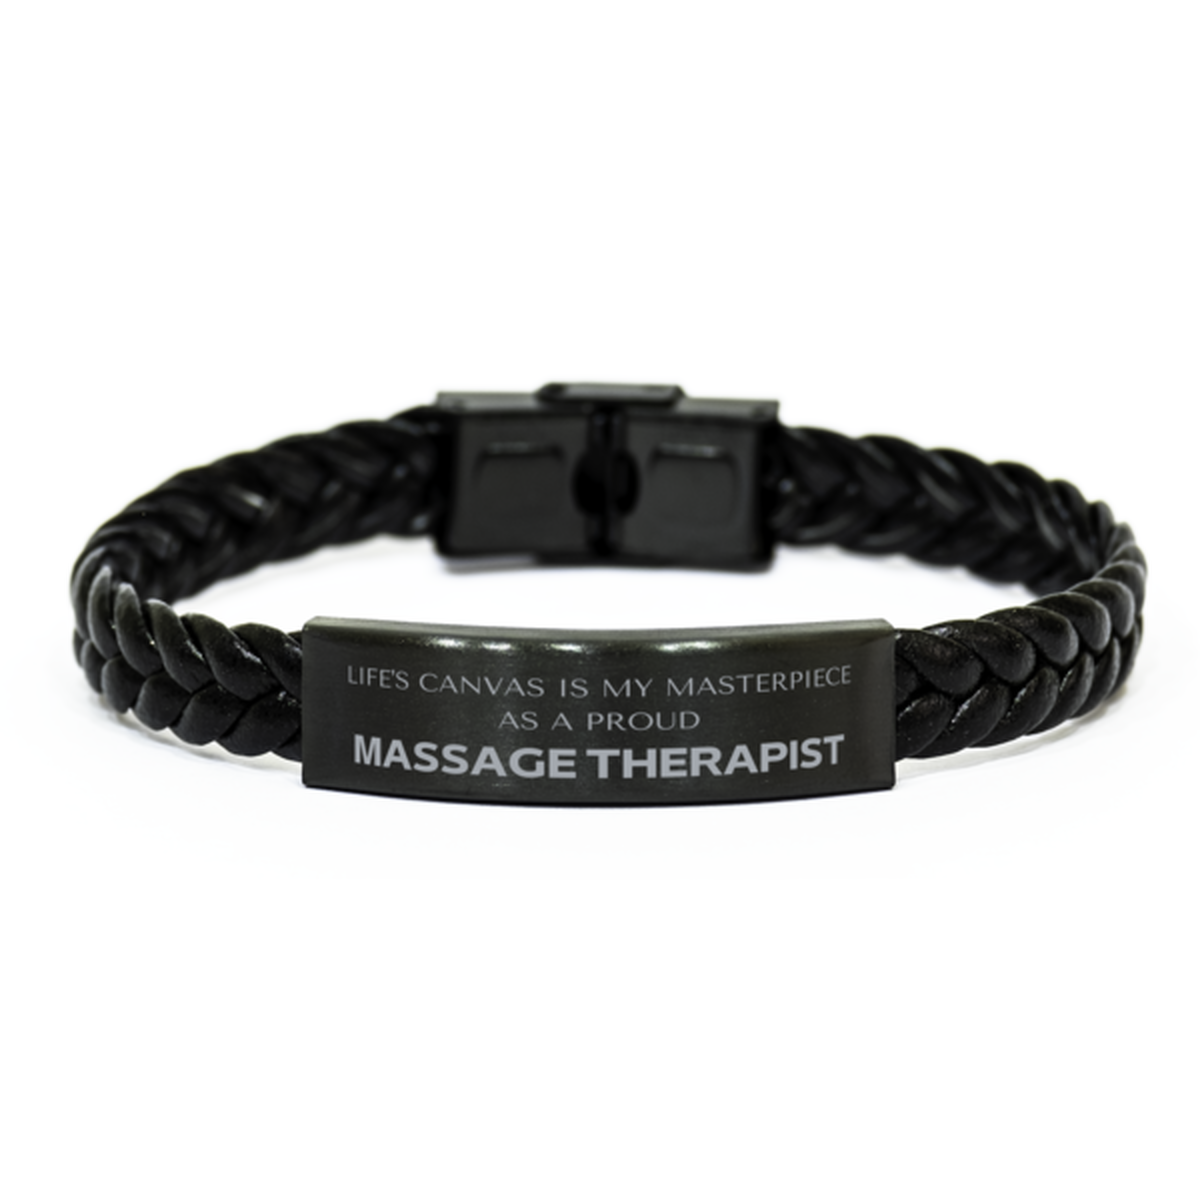 Proud Massage Therapist Gifts, Life's canvas is my masterpiece, Epic Birthday Christmas Unique Braided Leather Bracelet For Massage Therapist, Coworkers, Men, Women, Friends